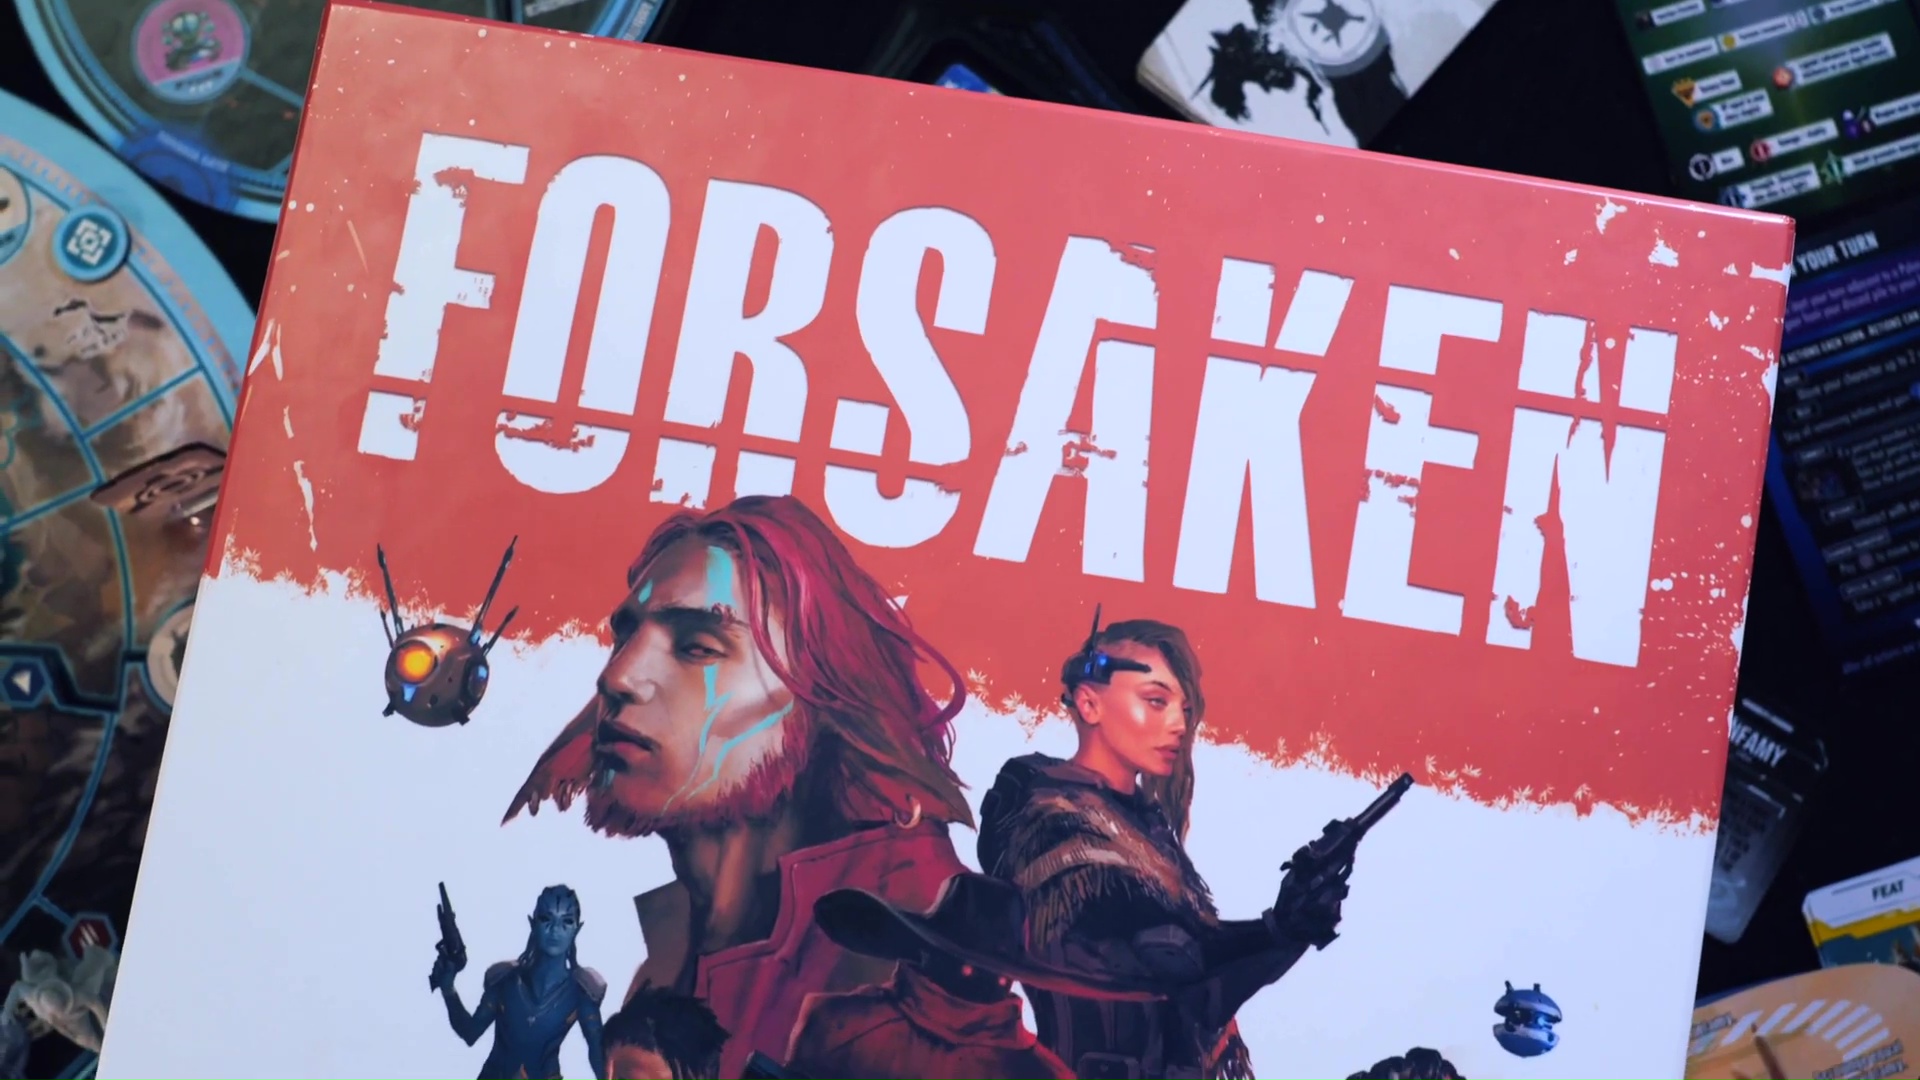 Cover art for the Forsaken board game from Game Trays shows a red-headed mutant man an a female gunslinger.